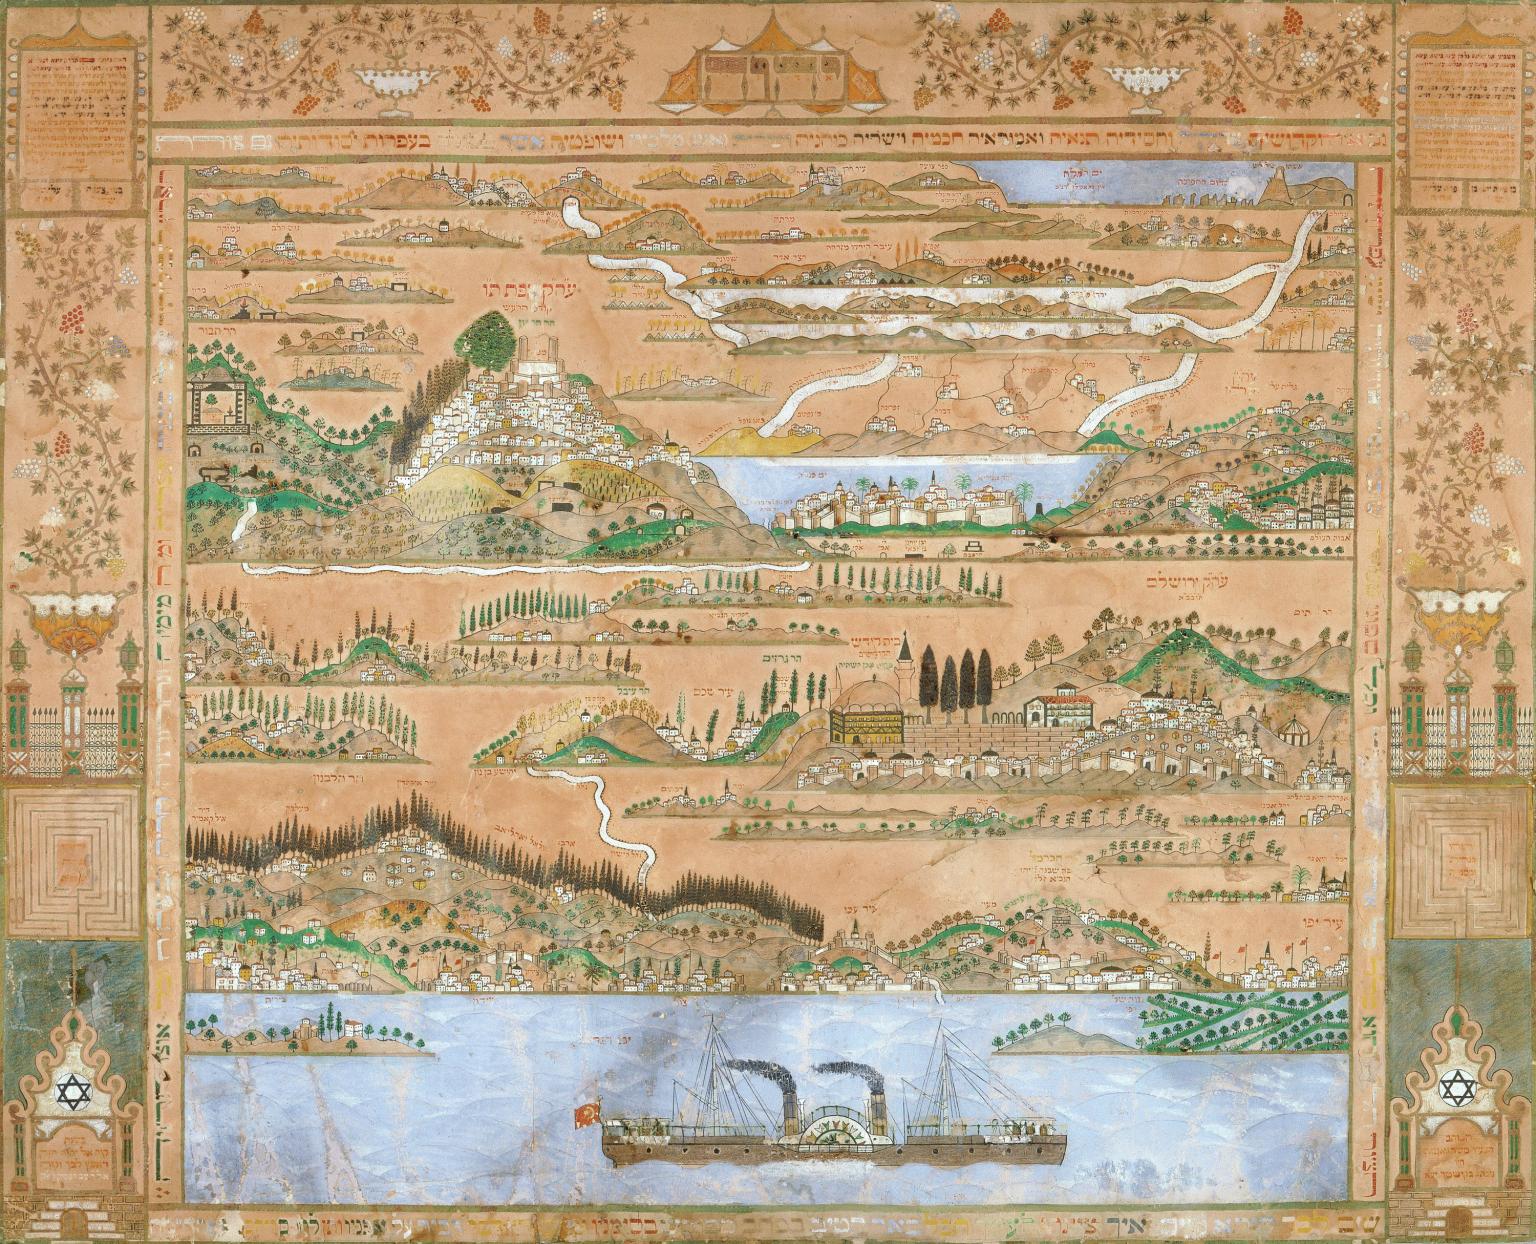 Drawing on paper of hills, water with boat, and buildings, with Hebrew text on top and border with vines and architectural elements.